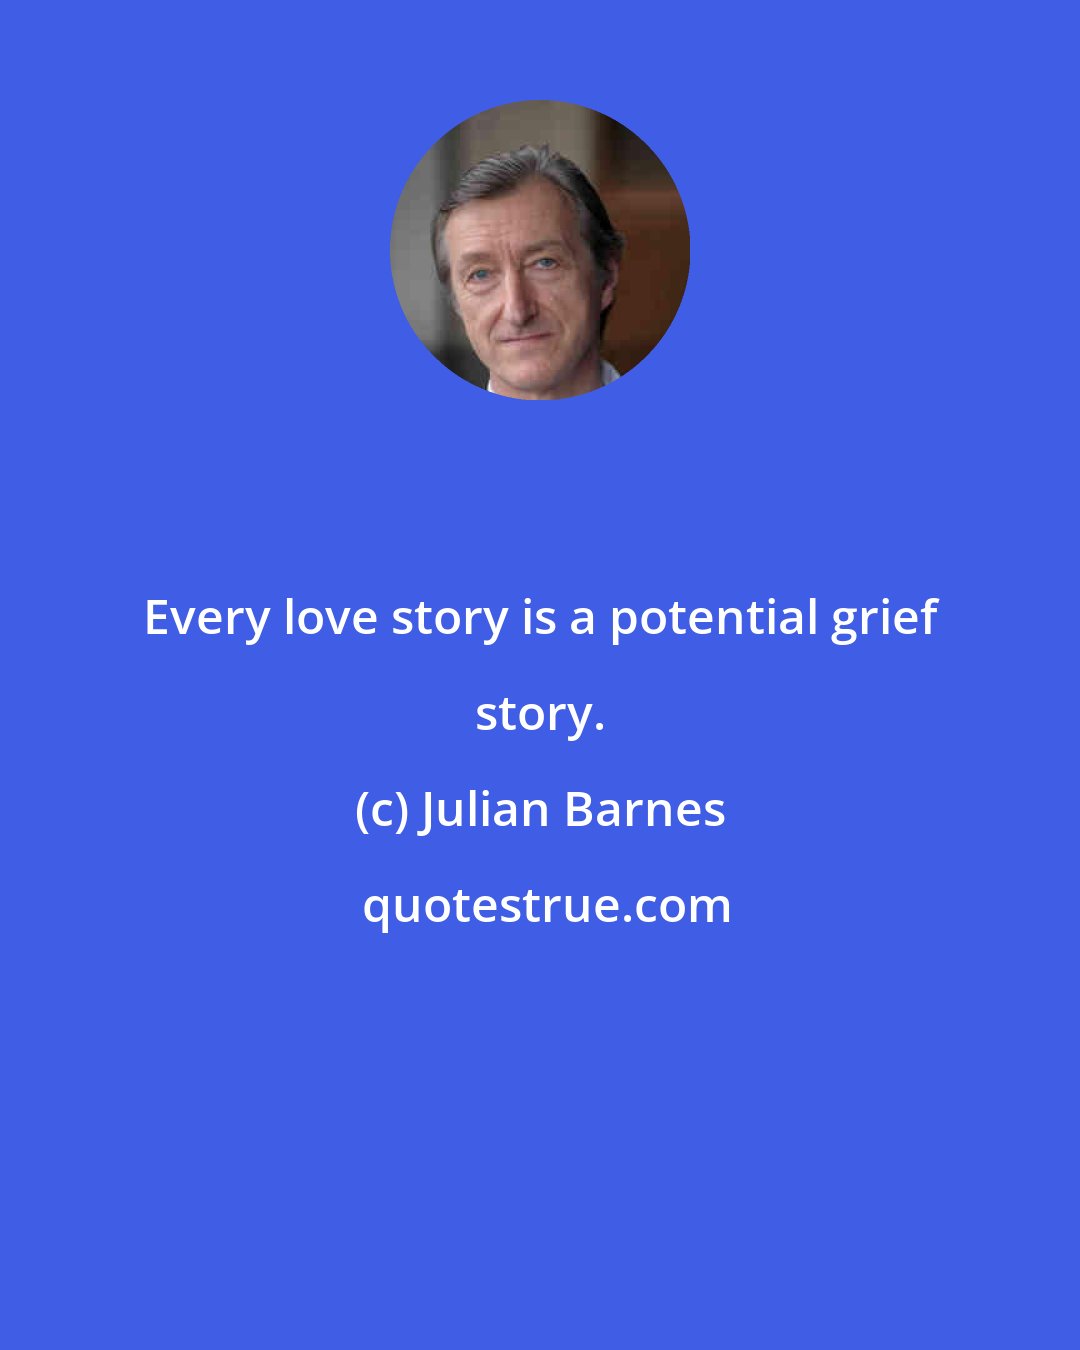 Julian Barnes: Every love story is a potential grief story.